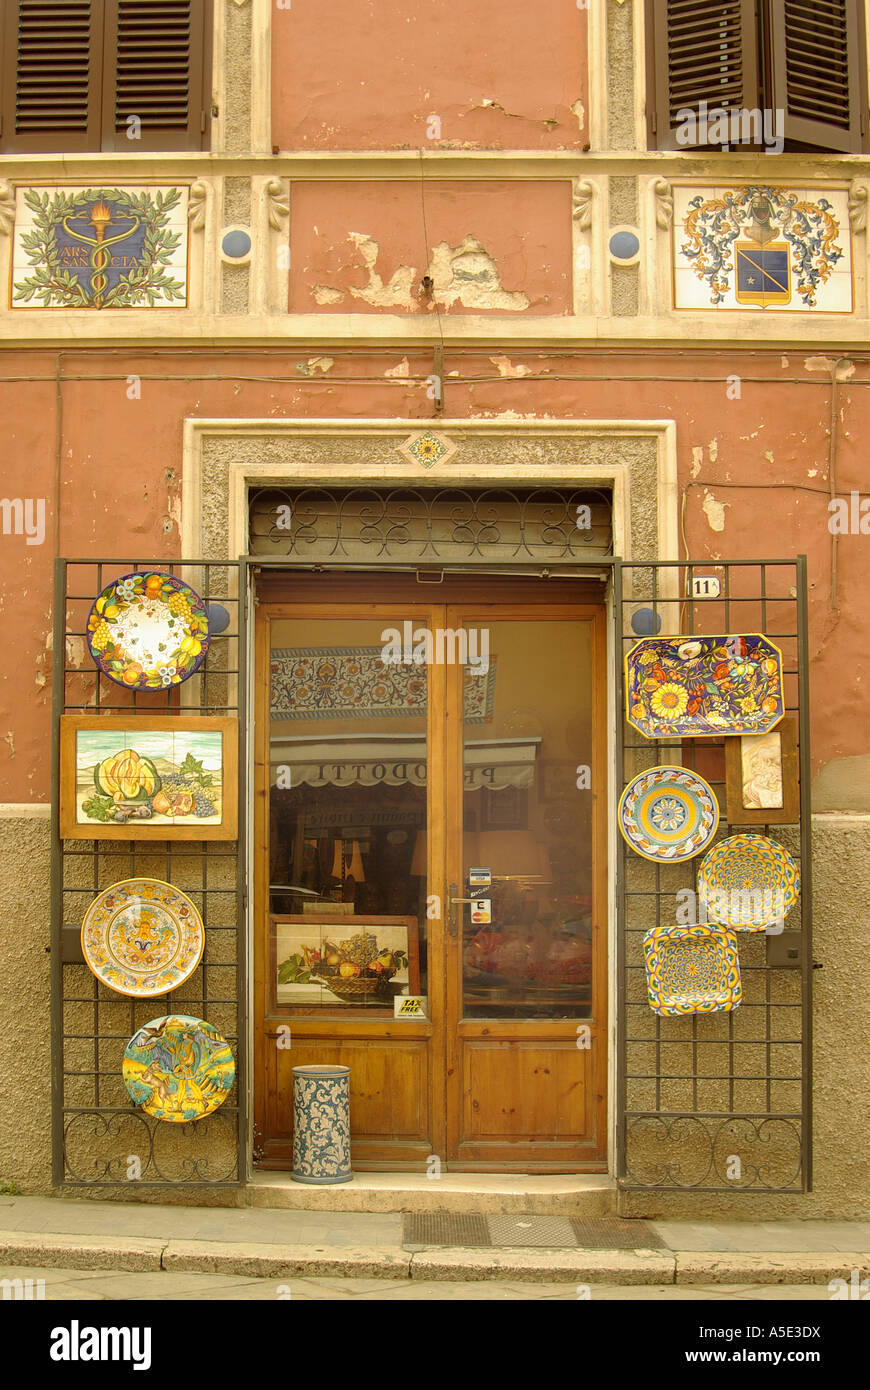 Deruta Italy: Shop selling glazed hand painted decorated plates in the Umbrian town of Deruta Stock Photo